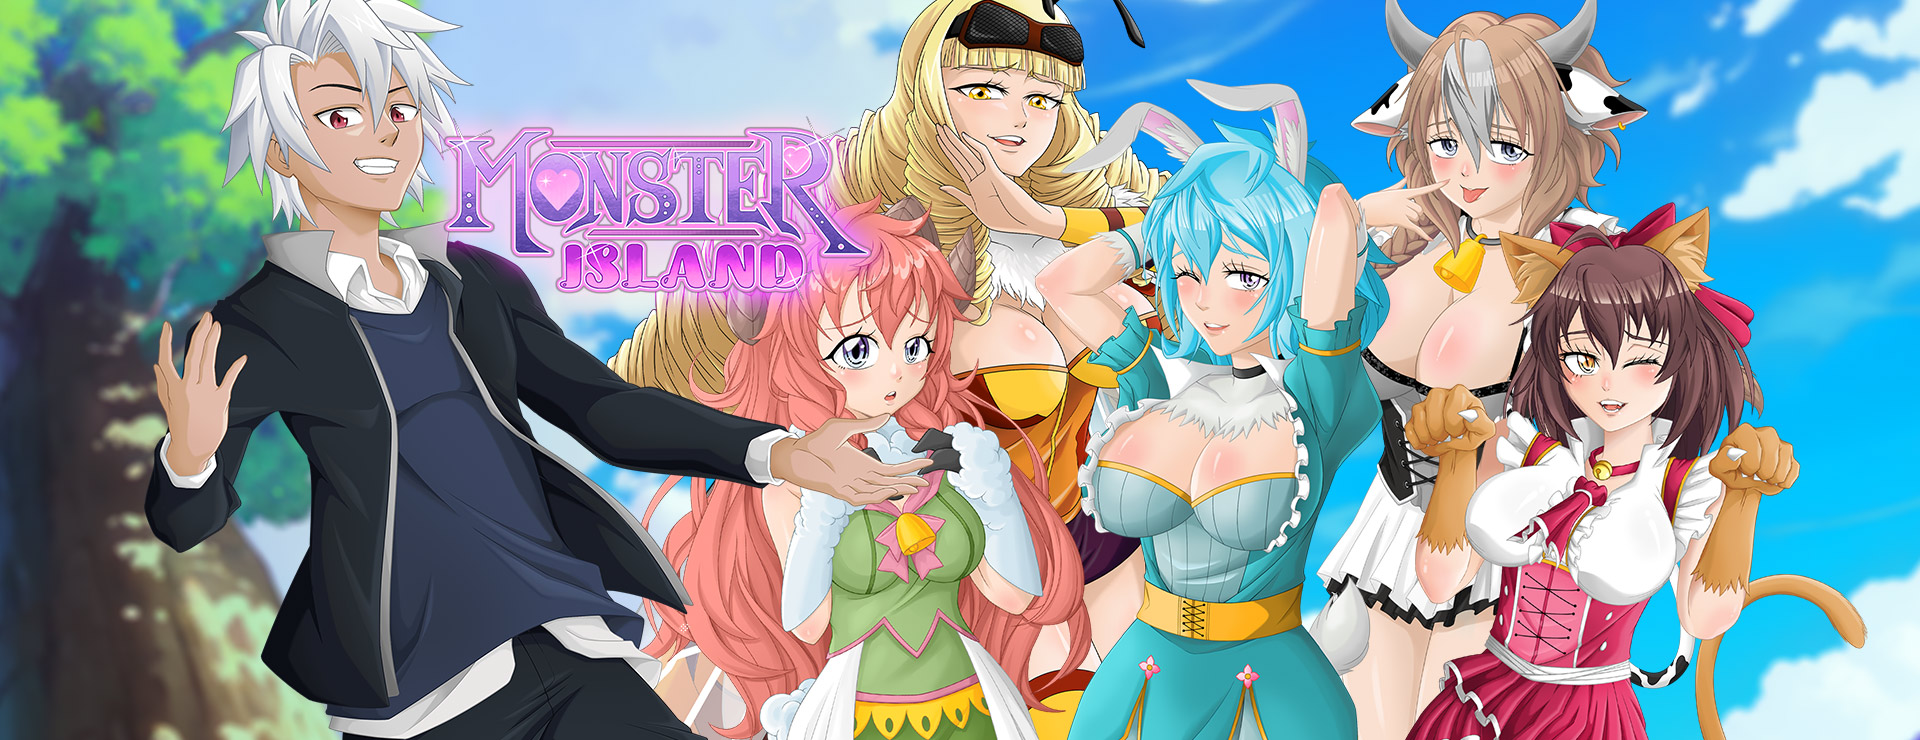 Monster Island - Casual Game